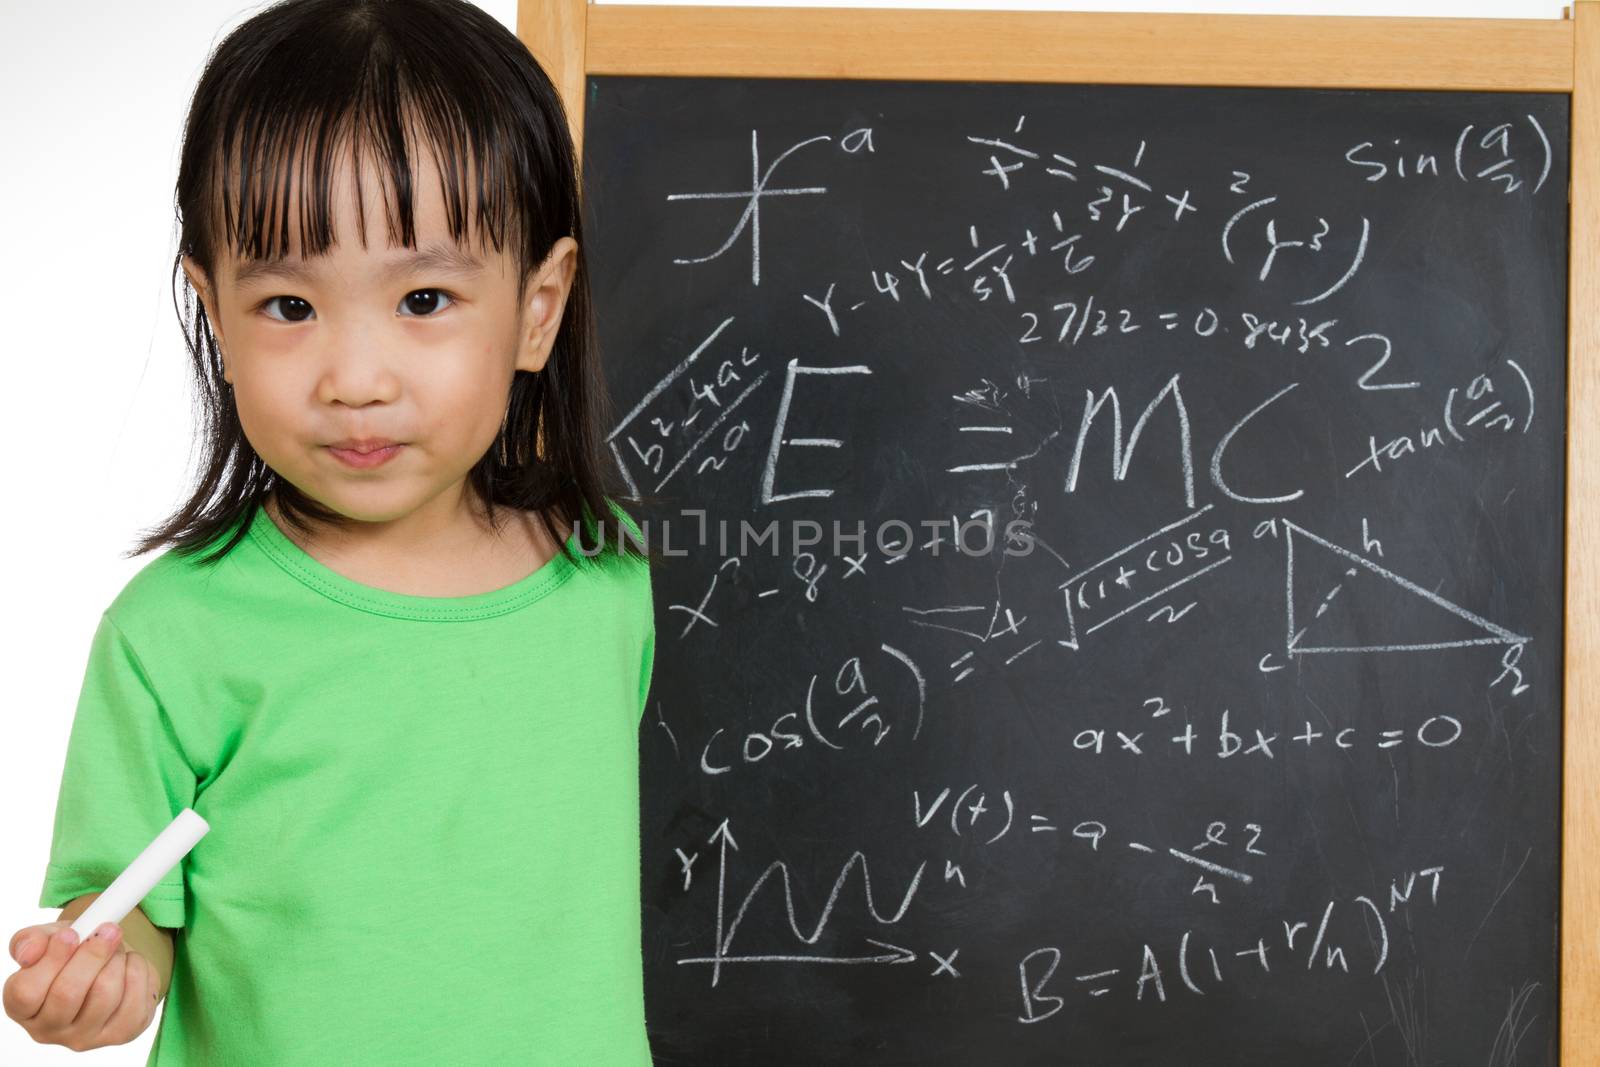 Asian Chinese children againts blackboard or chalkboard with formulas in plain isolated white background.